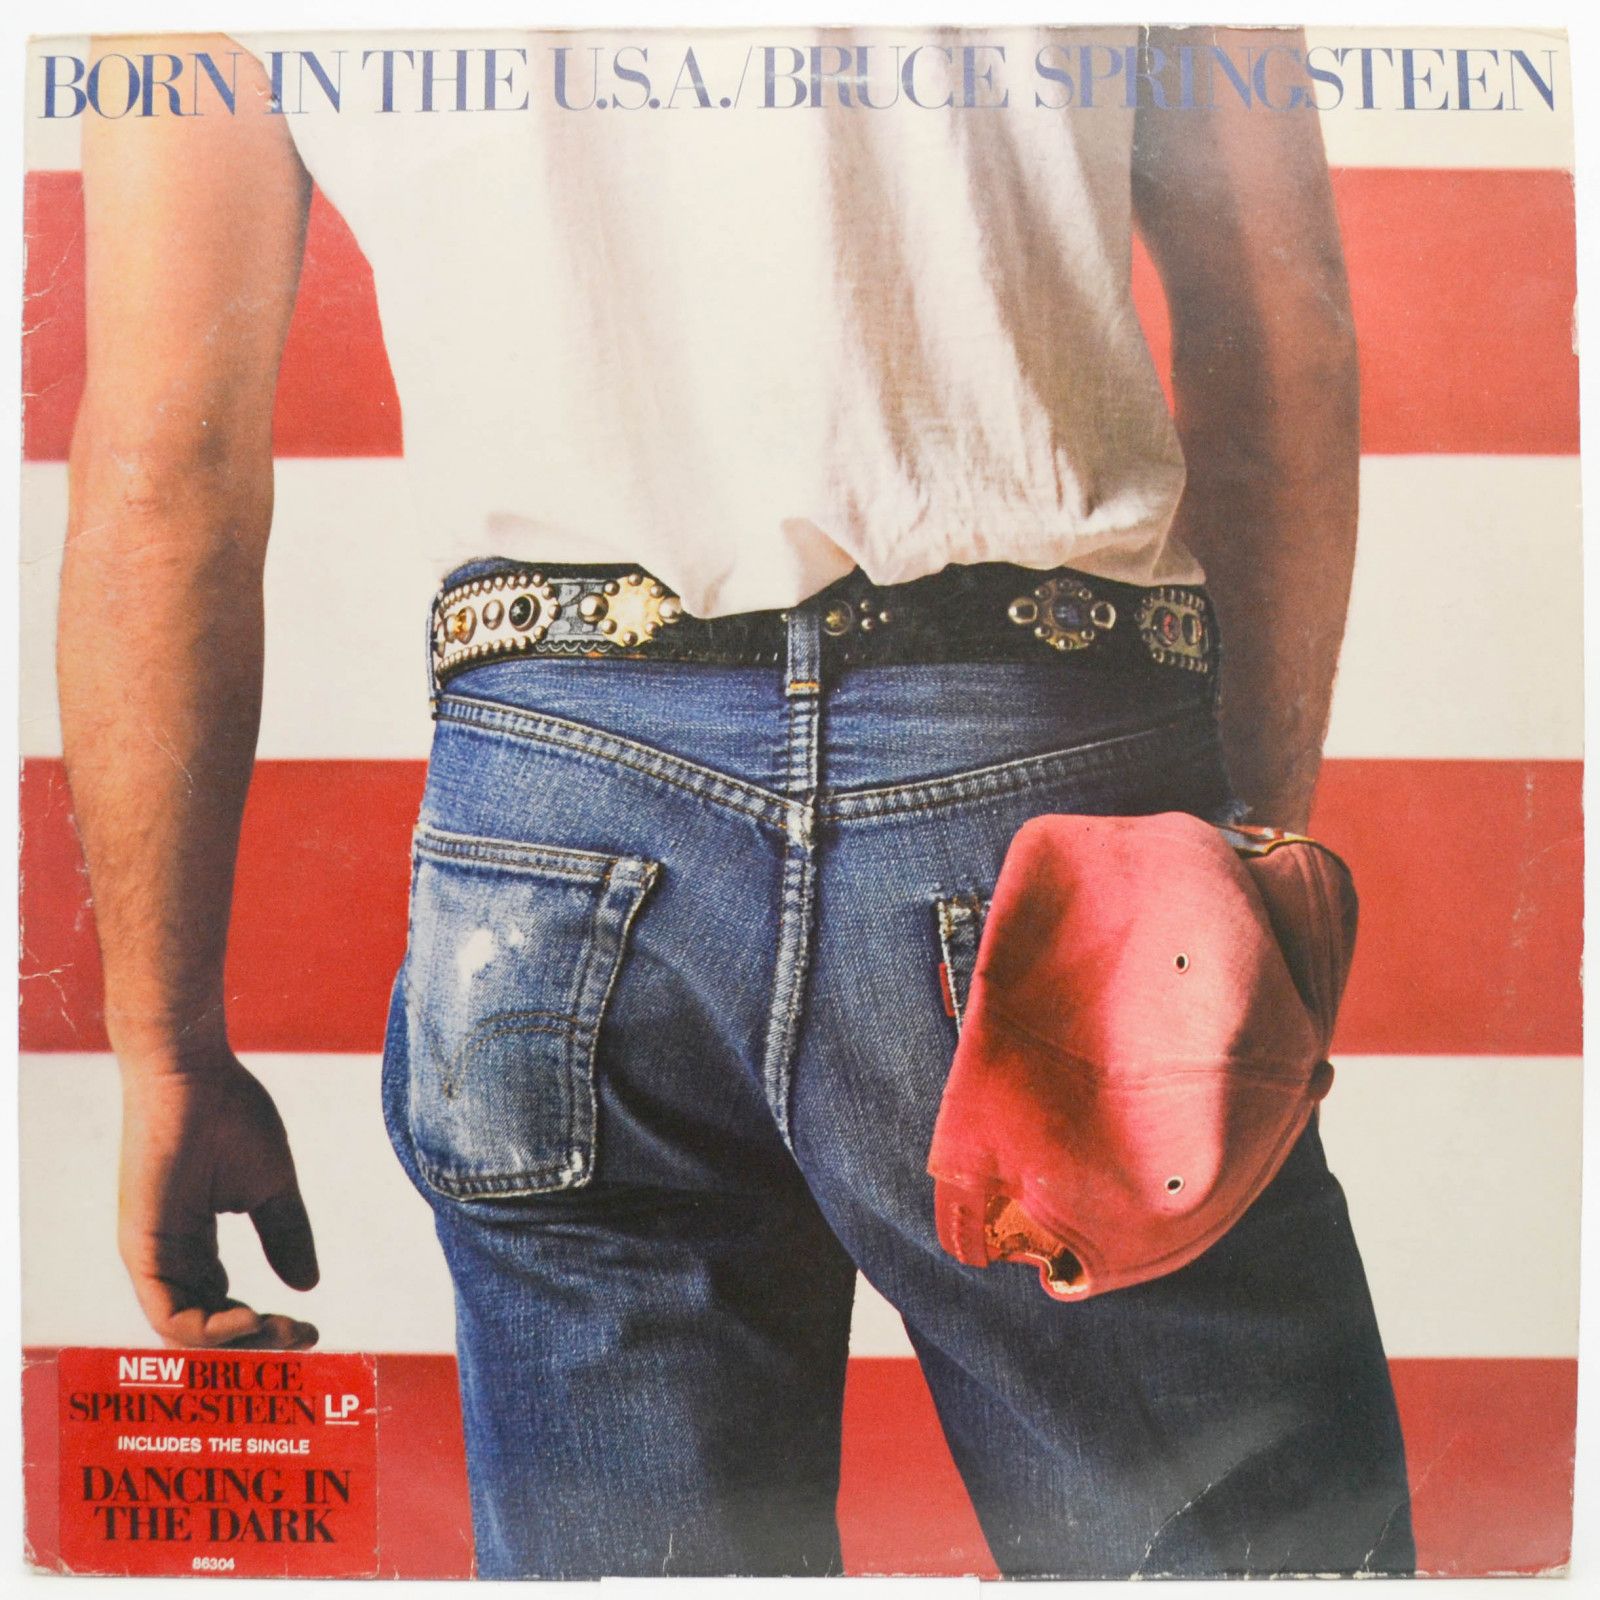 Bruce Springsteen — Born In The U.S.A., 1984